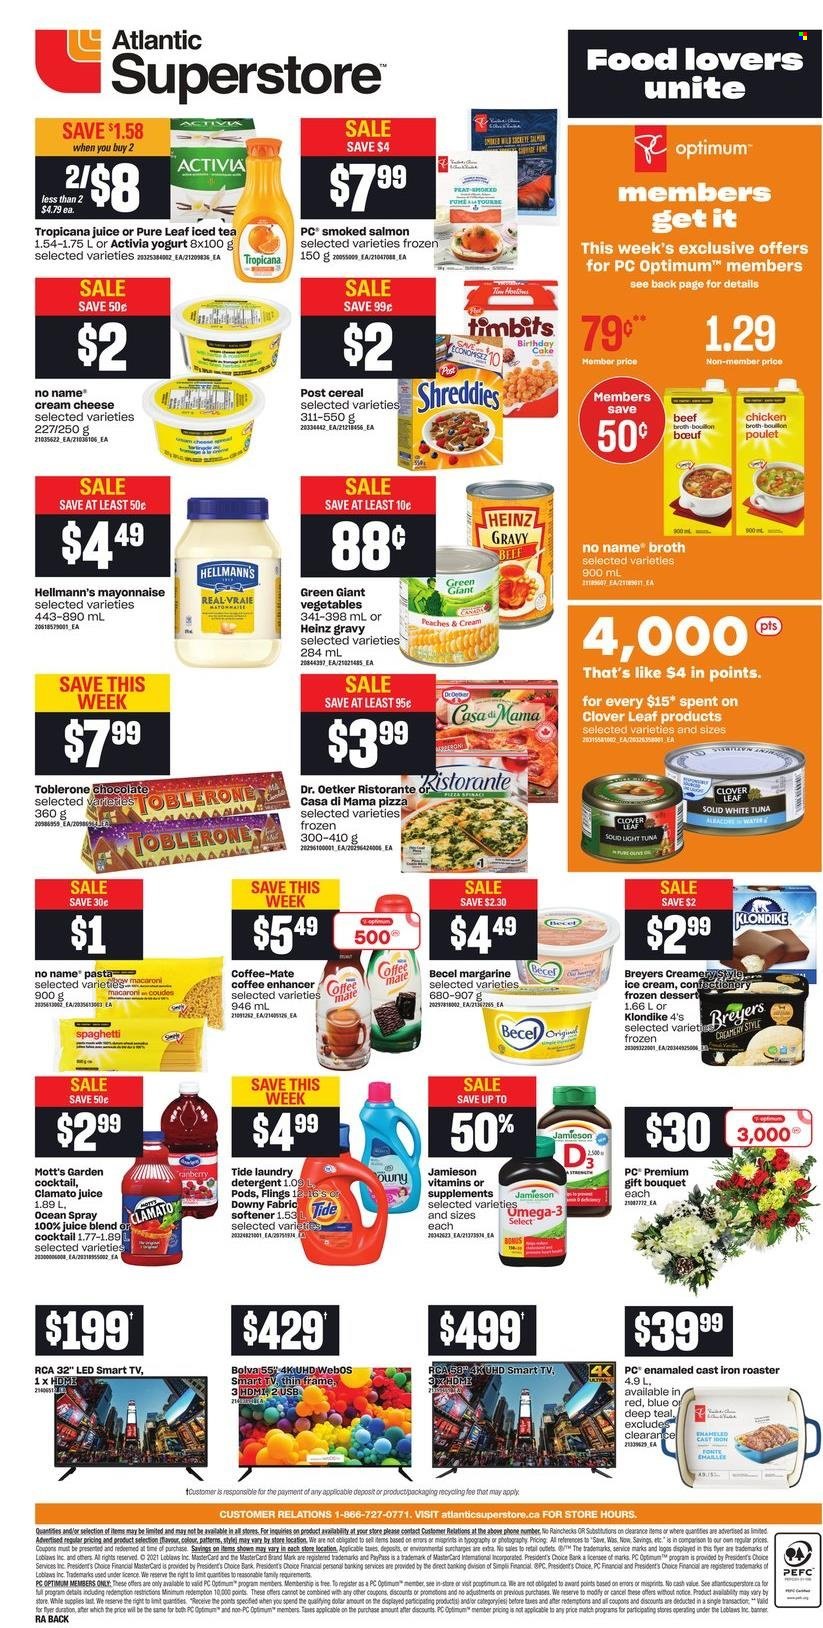 thumbnail - Atlantic Superstore Flyer - December 16, 2021 - December 21, 2021 - Sales products - cake, peaches, Mott's, salmon, smoked salmon, tuna, No Name, spaghetti, pizza, pasta, cream cheese, Dr. Oetker, Président, yoghurt, Clover, Activia, Coffee-Mate, margarine, mayonnaise, Hellmann’s, ice cream, Toblerone, beef broth, chicken broth, broth, Heinz, light tuna, cereals, juice, ice tea, Clamato, Pure Leaf, L'Or, Tide, fabric softener, Downy Laundry, Optimum, bouquet. Page 2.